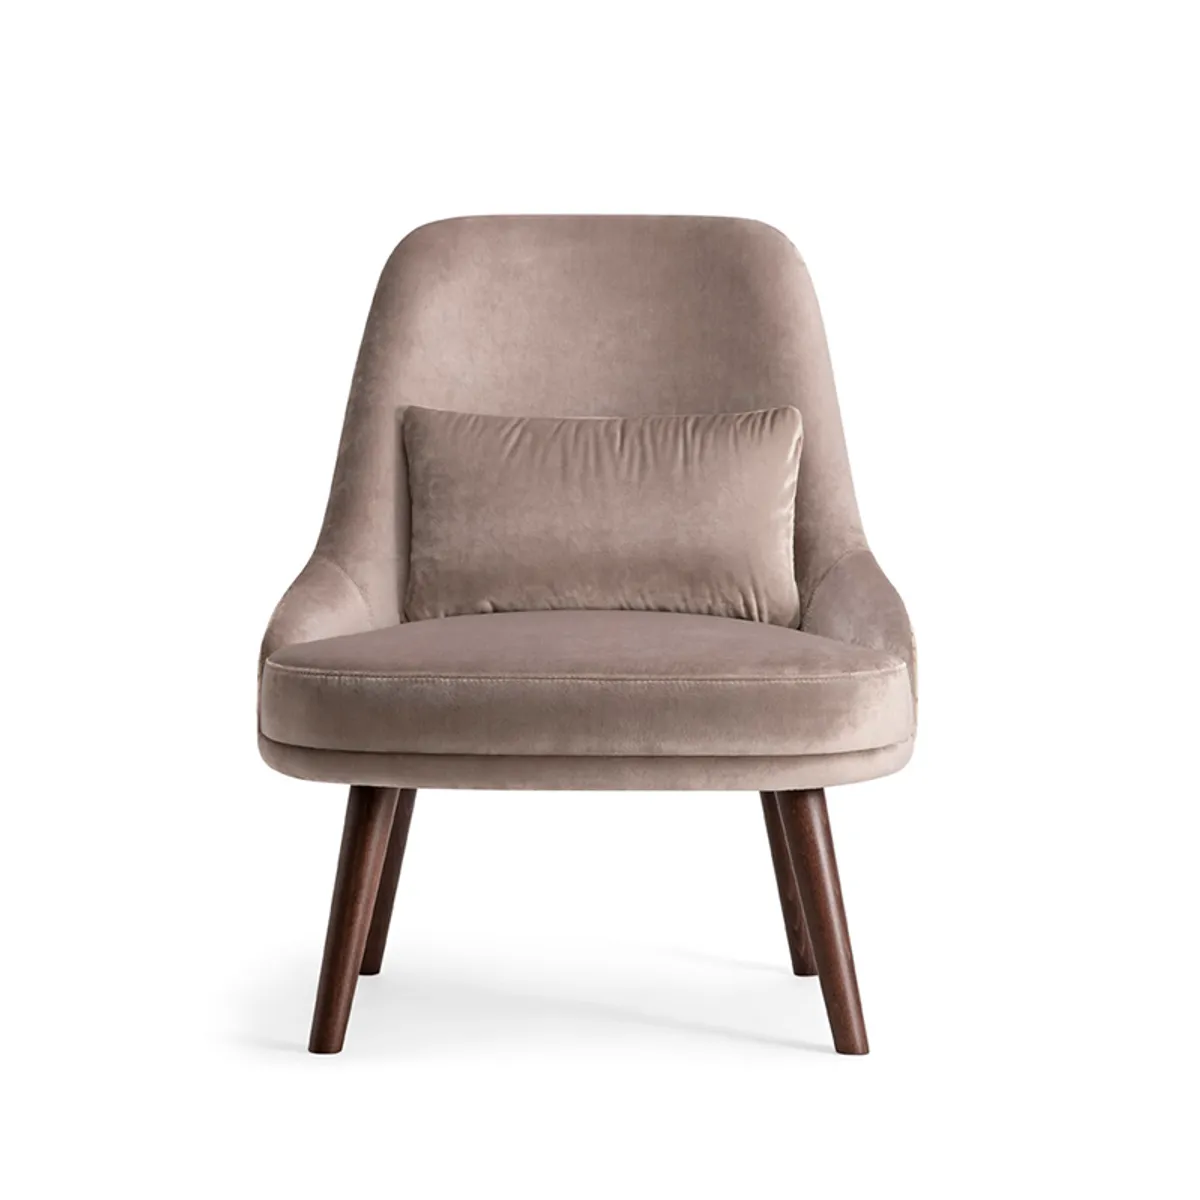 Nandie Lounge Chair Nude Upholstery And Wooden Legs Insideoutcontracts